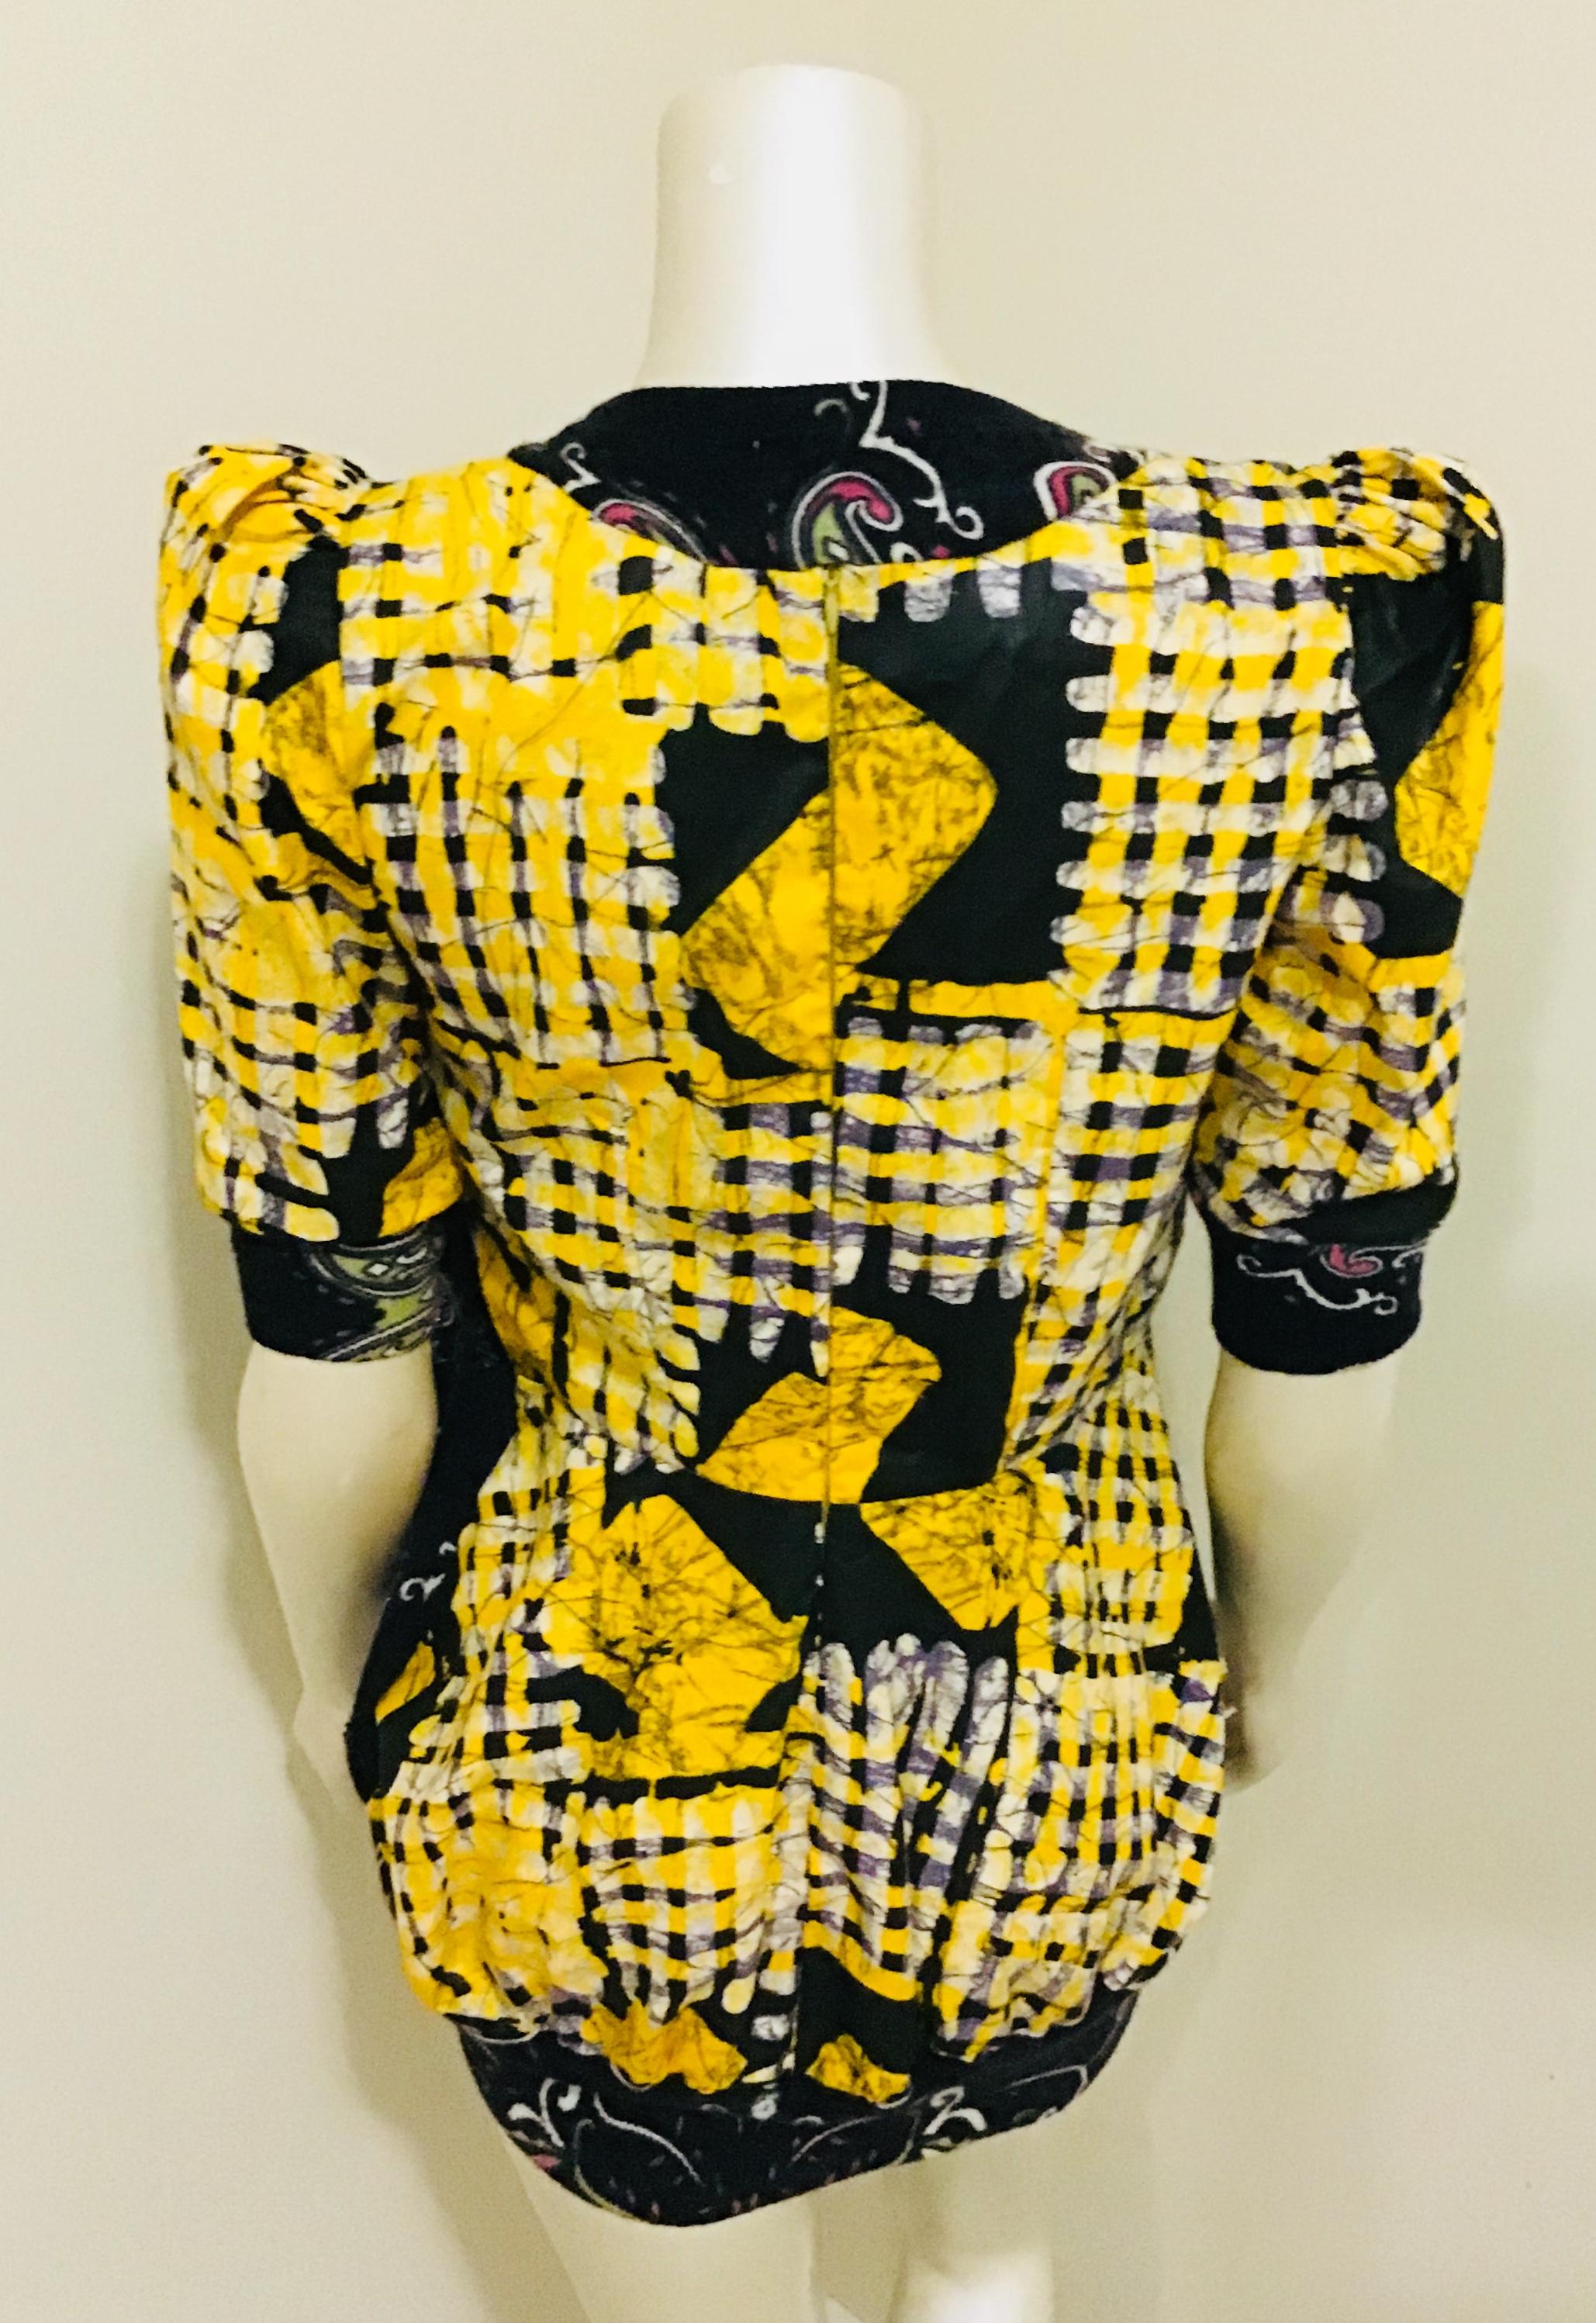 Puff Shoulder Multi Print Top Dress In Good Condition For Sale In Queens, NY